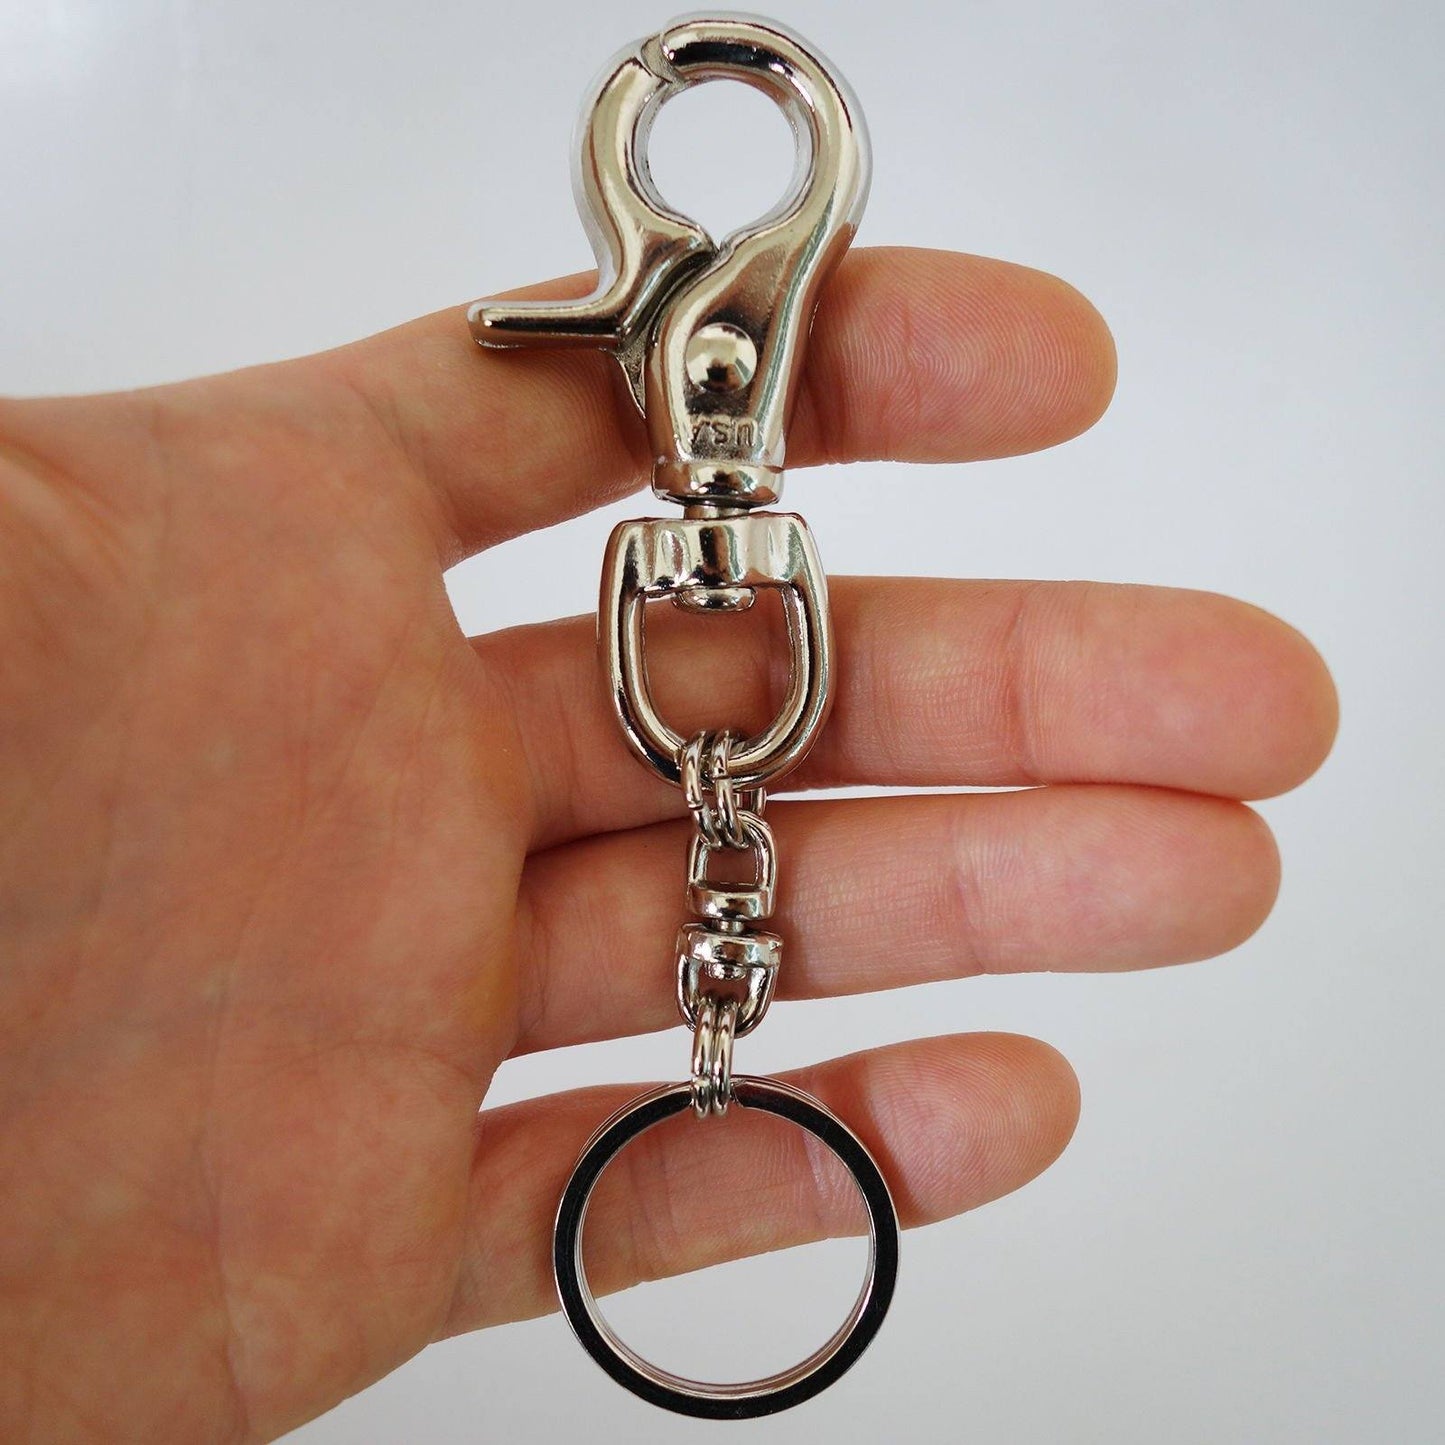 Solid Metal Keyring Keychain Key Holder Ring Chain Trousers Belt Dog Lead Clip Solid Metal Keyring Keychain Key Holder Ring Chain Trousers Belt Dog Lead Clip